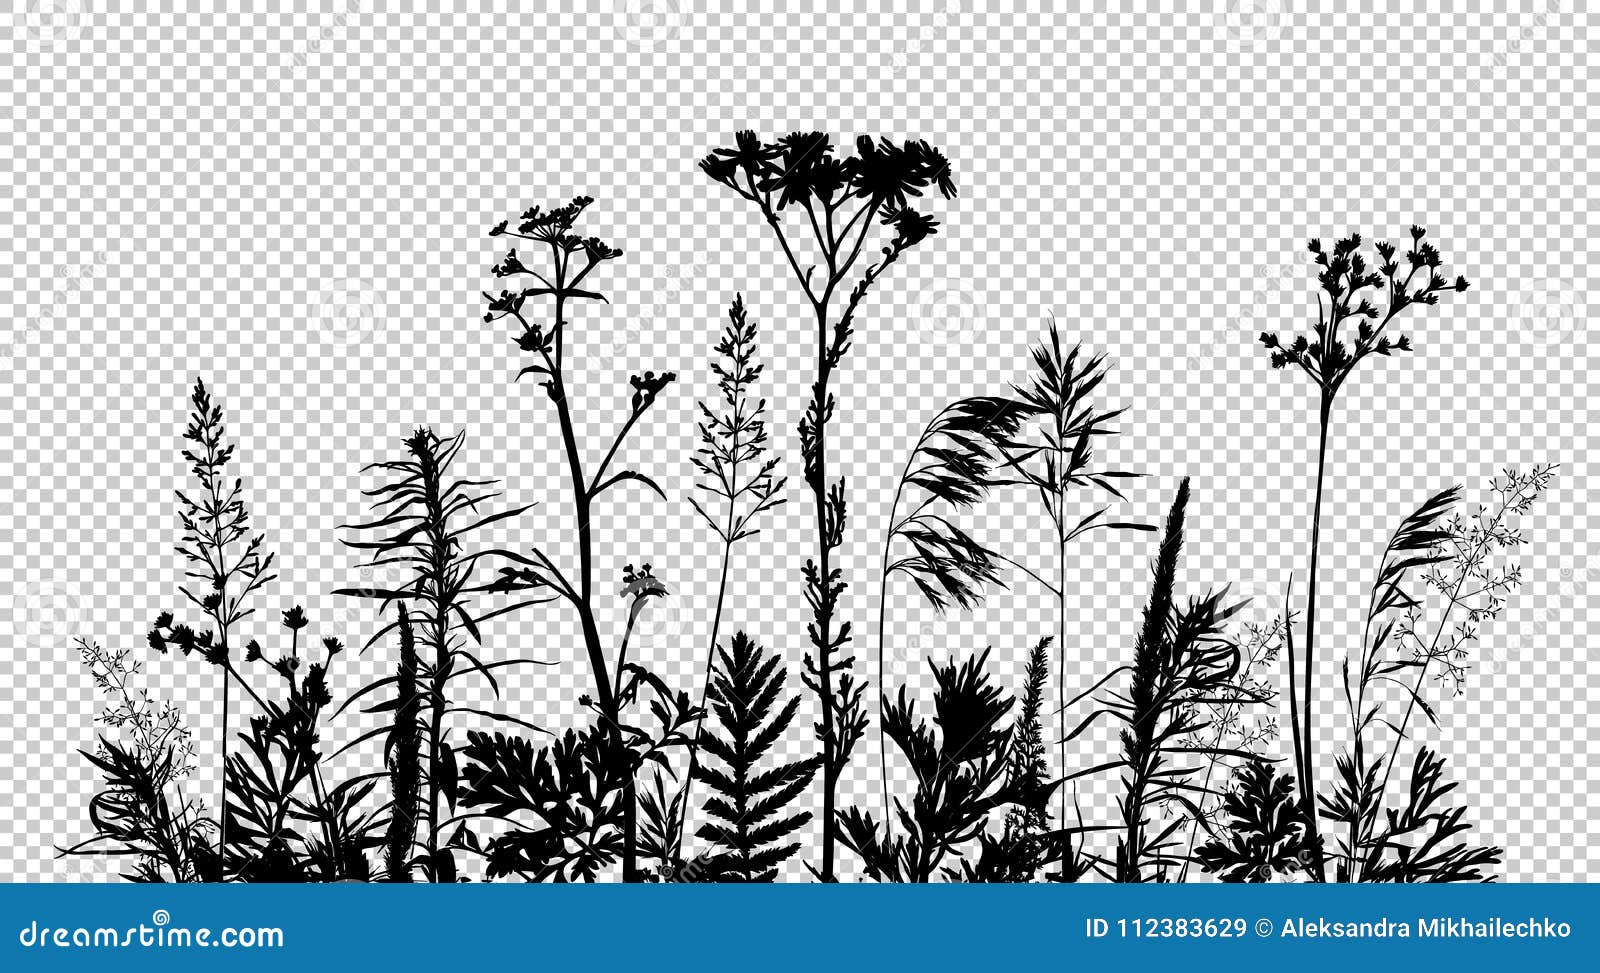 Wild Flowers Vector Collection Herbs Herbaceous Stock Vector (Royalty Free)  2111665205